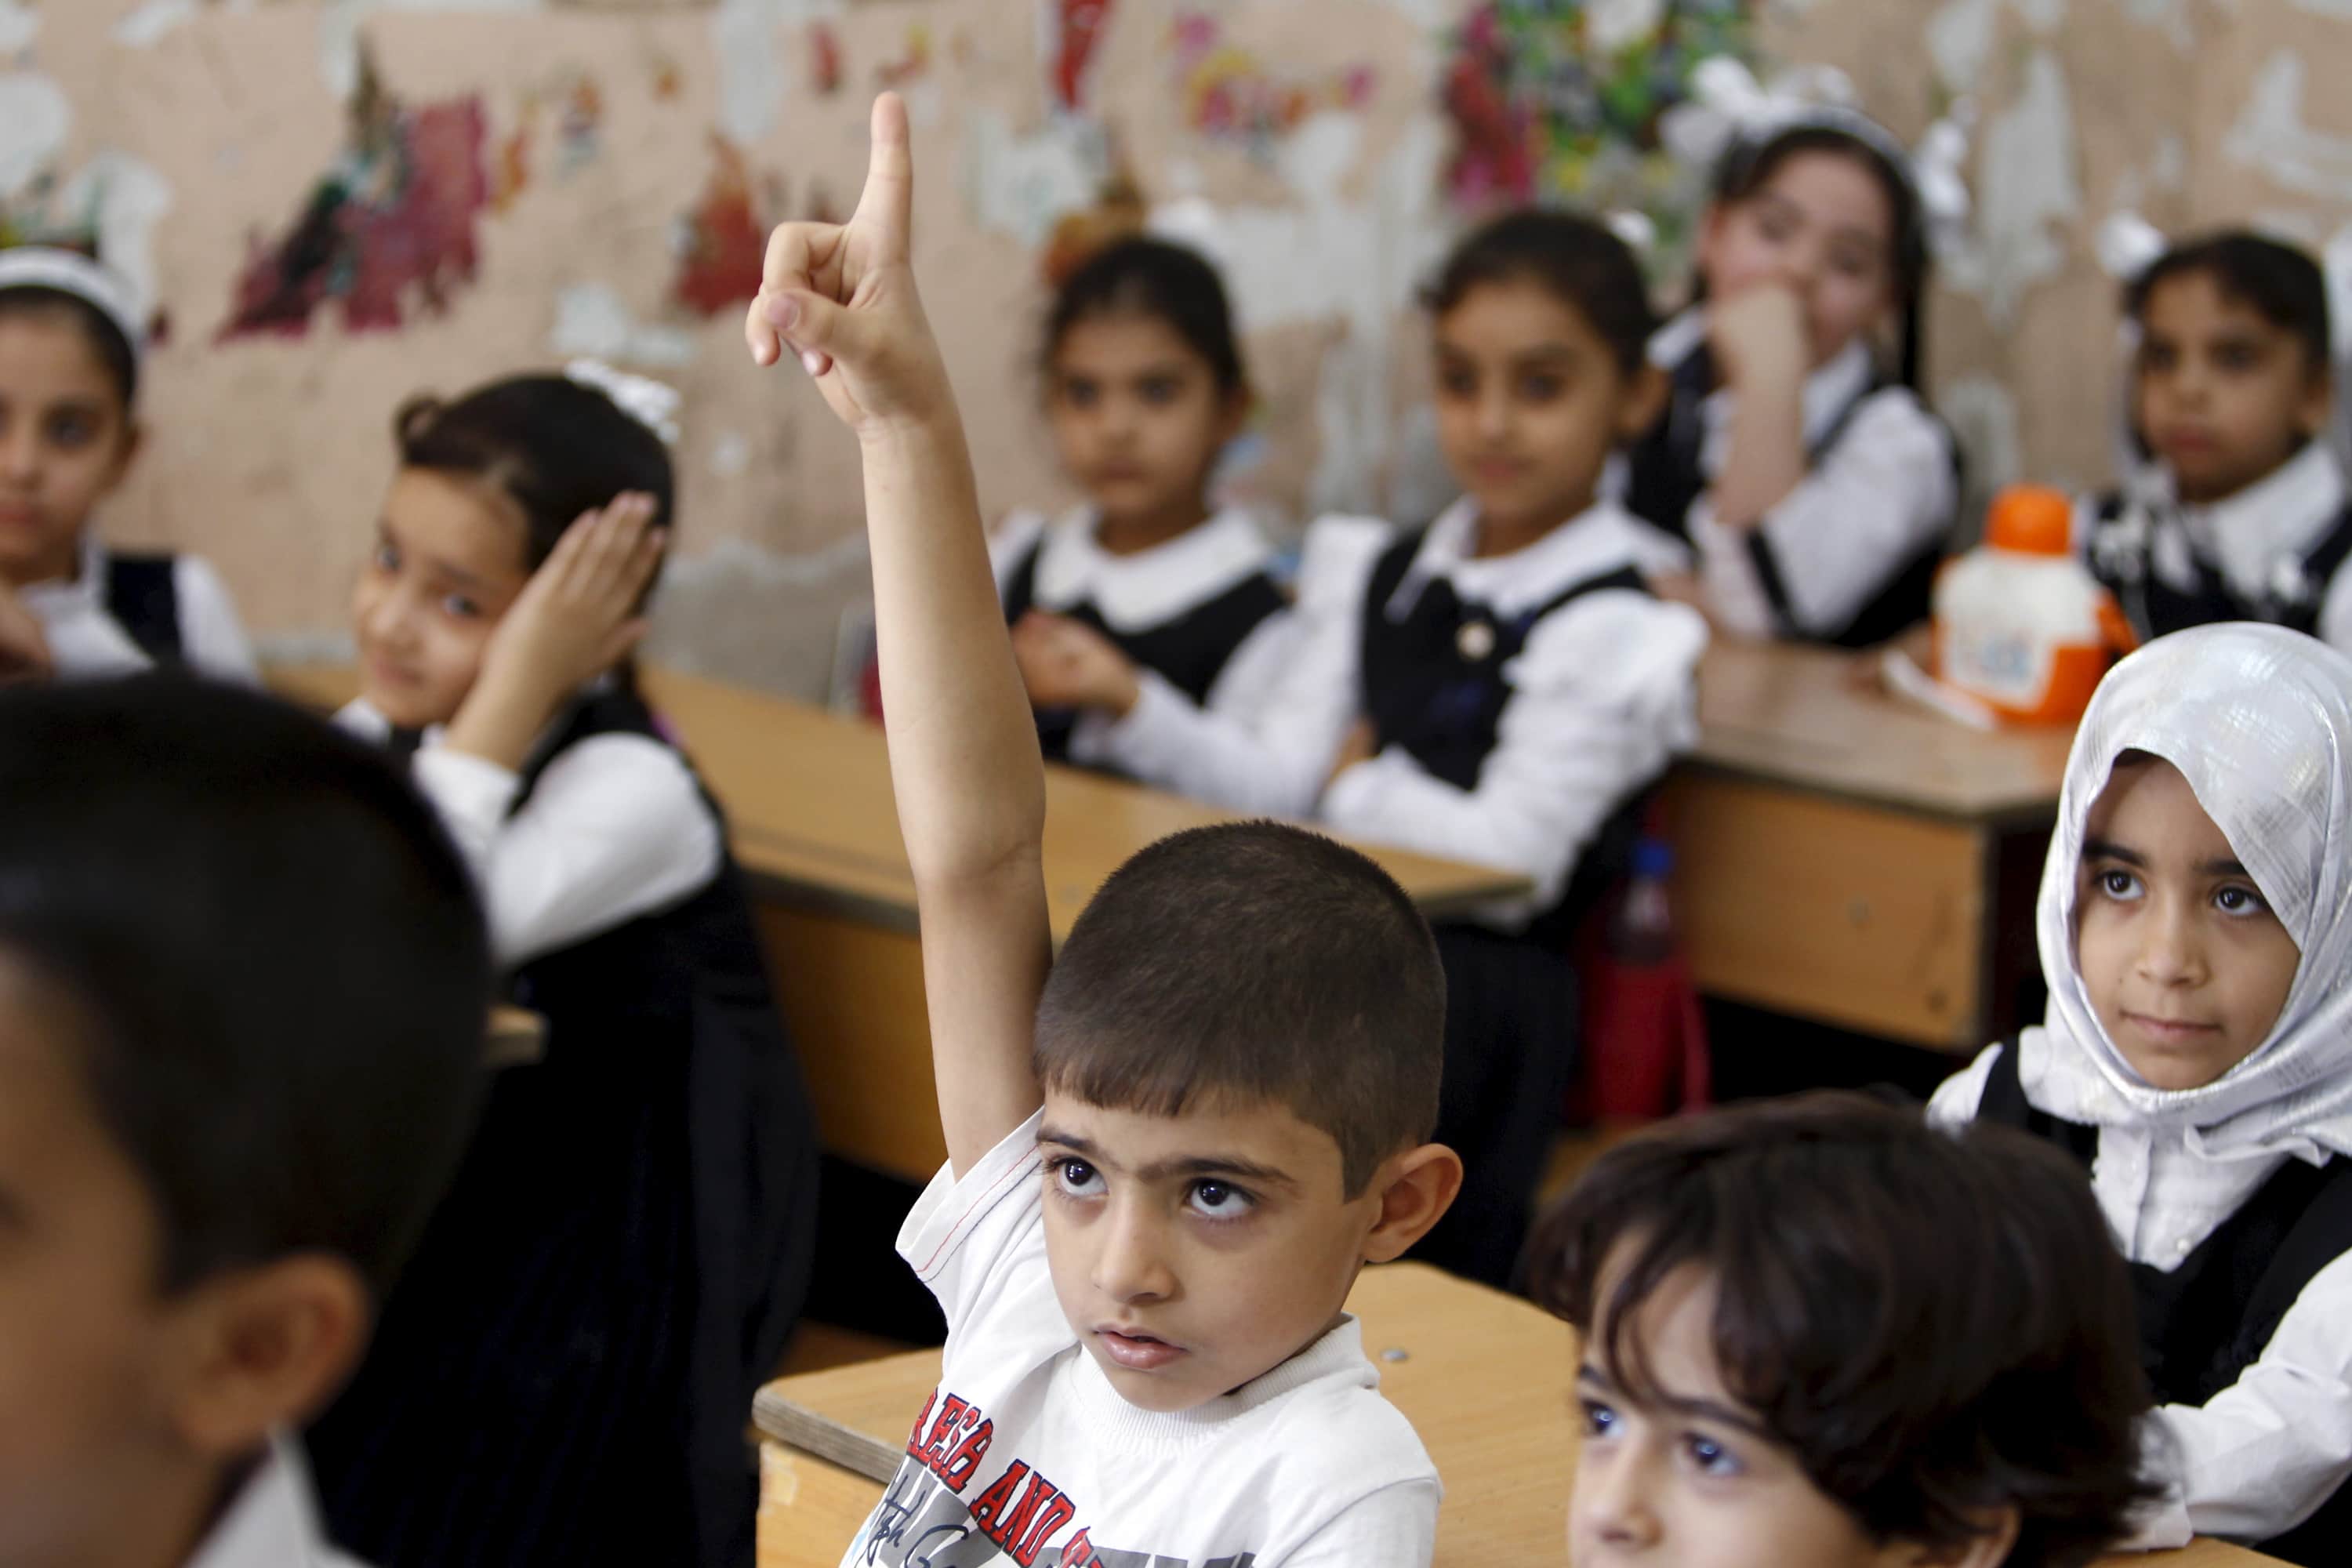 A student raises his hand while attending the first day of the new school term at a primary school in Baghdad, October 18, 2015, REUTERS/Ahmed Saad